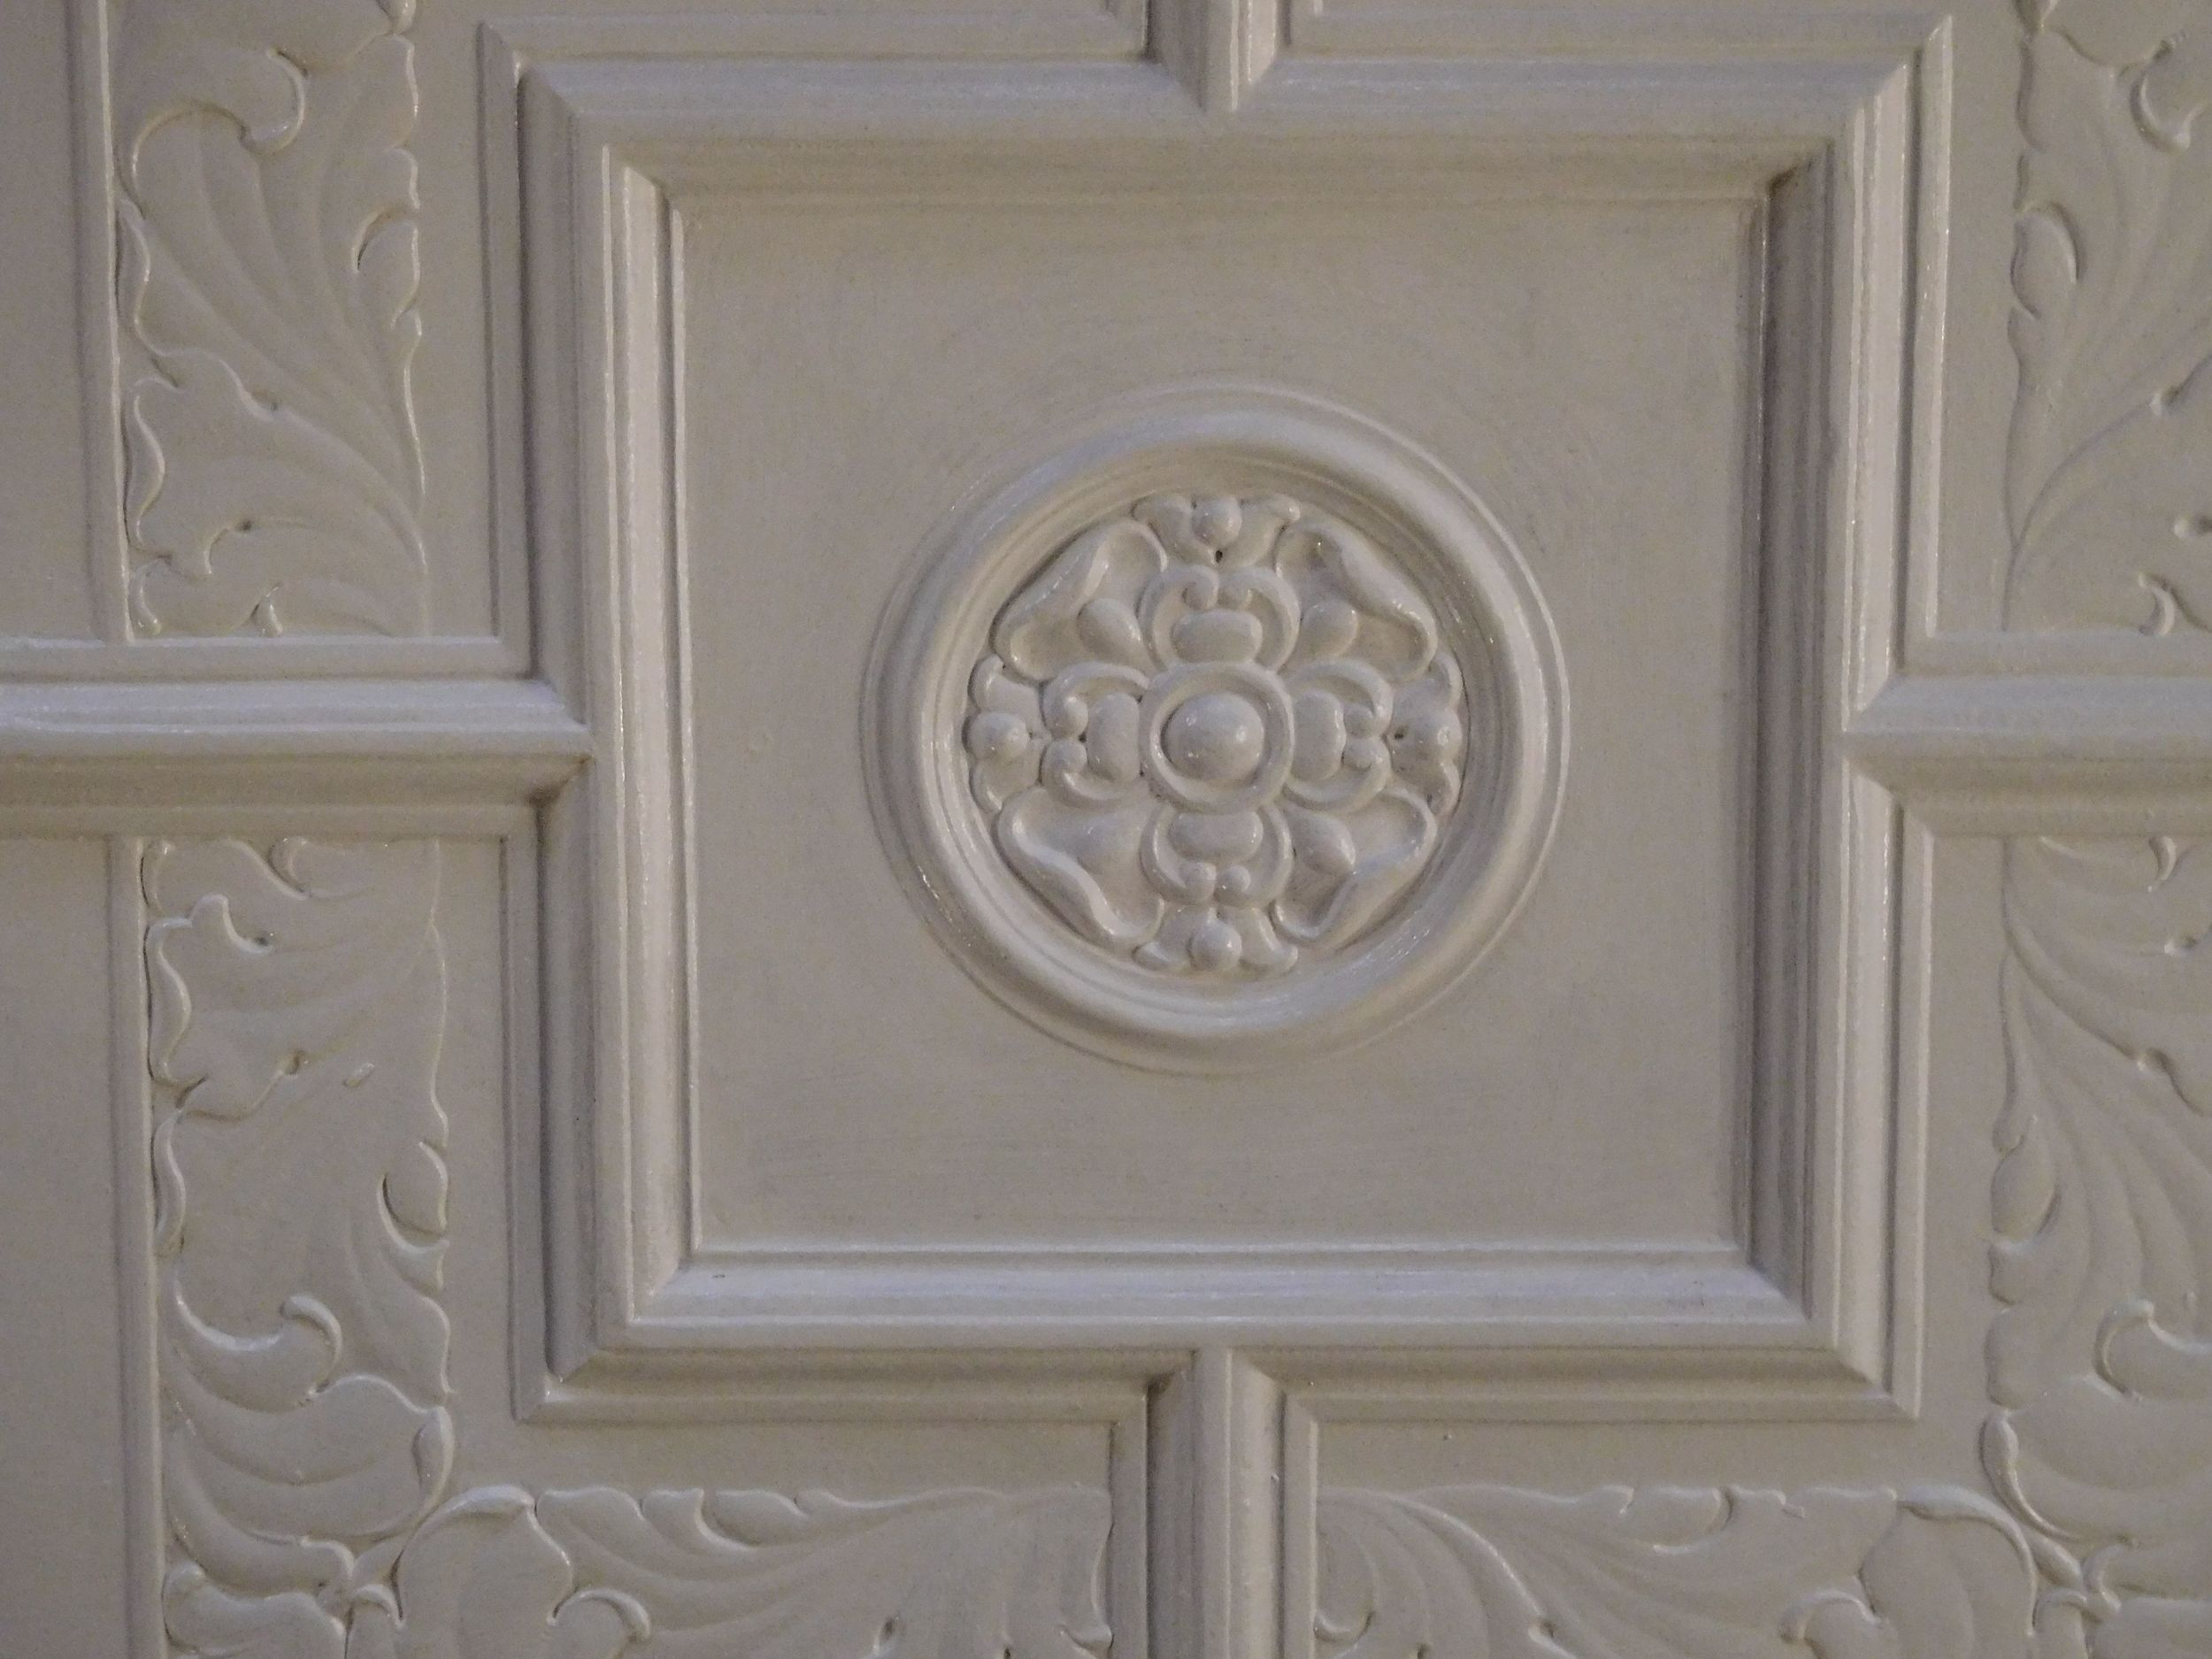 West Mansion front entry ceiling detail.jpg